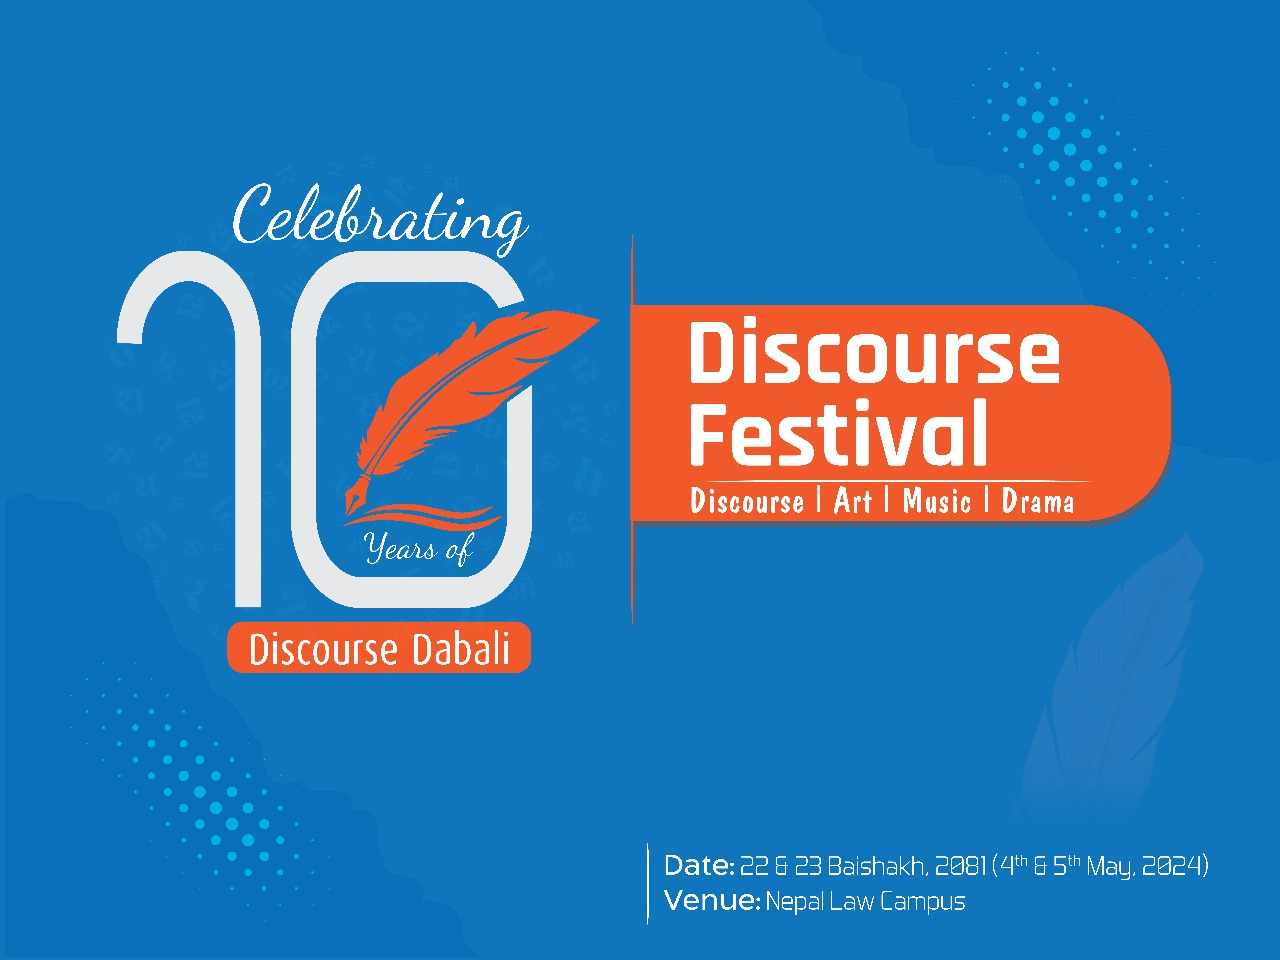 Discourse Festival to kick off on May 4